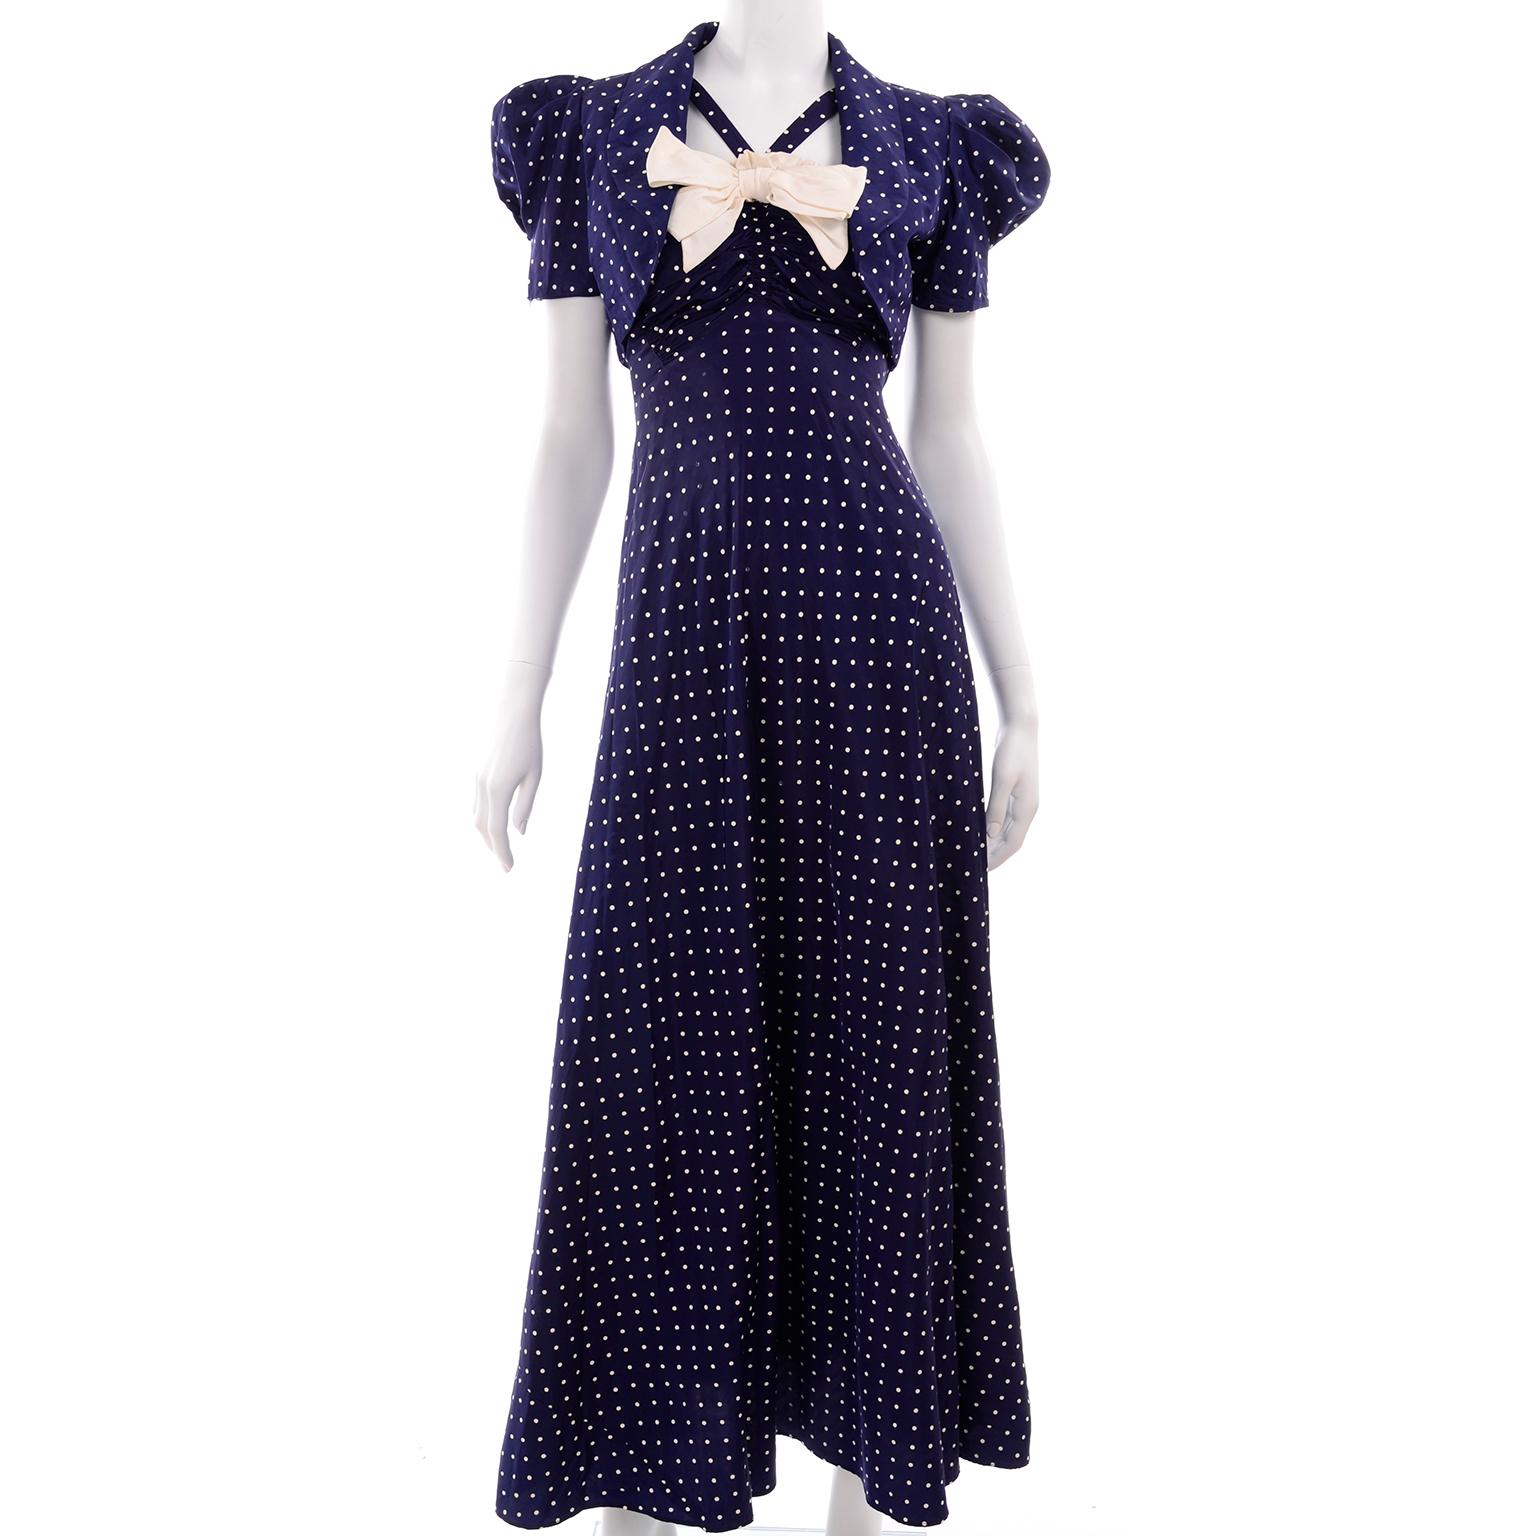 This is an adorable long dark blue vintage dress with tiny white polka dots and a matching cropped bolero jacket, from the late 1930's or early 1940's. The bust of the dress is gathered, with a white ruffle trim that has a large white bow in the